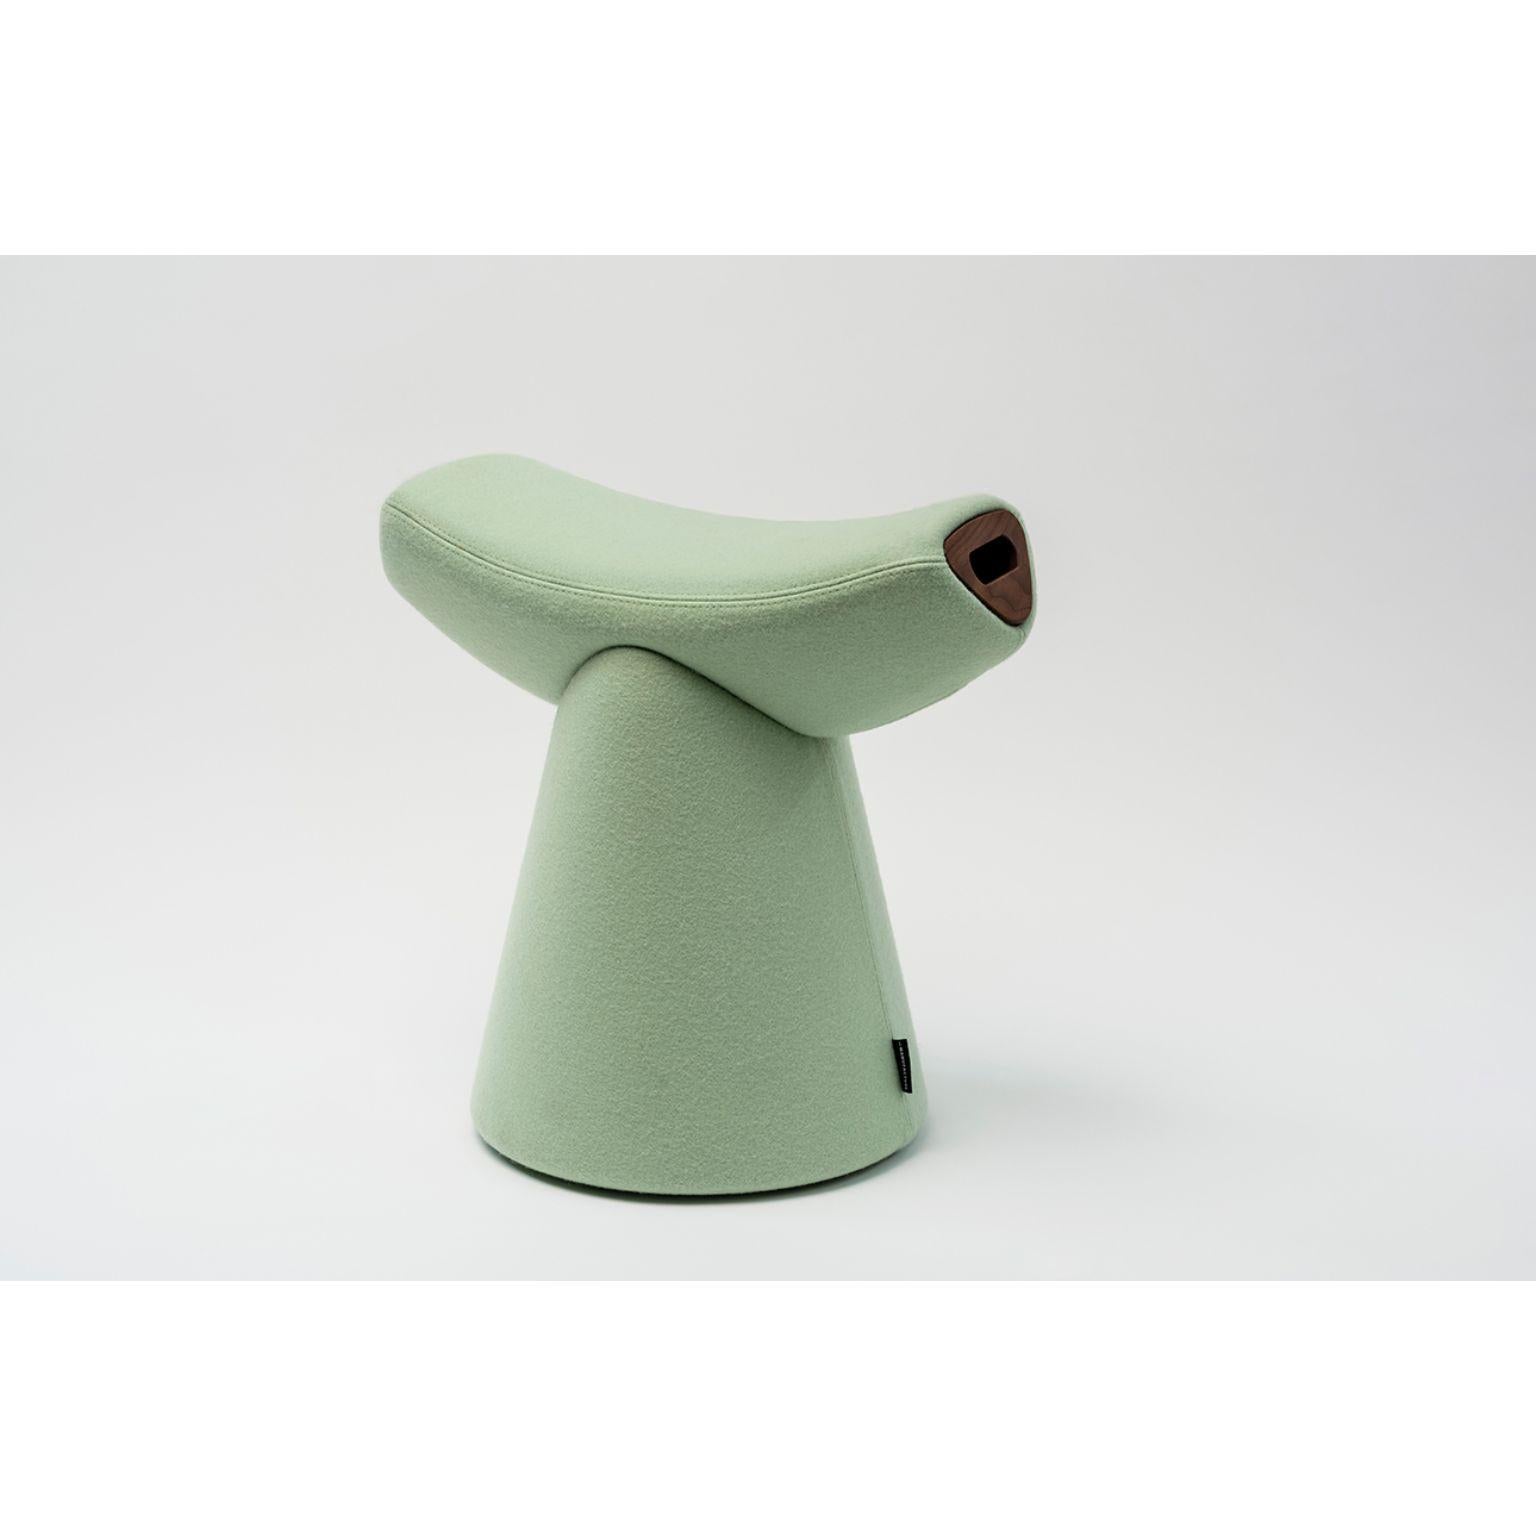 Gardian stool with handle by Patrick Norguet.
Materials: Fabric (also available in leather)
Handle: Noce Canaletto solid wood
Dimensions: W 51.1 x D 34.7 x H 49.8 cm

For the Gardian stool by designer Patrick Norguet, the concept of seating was